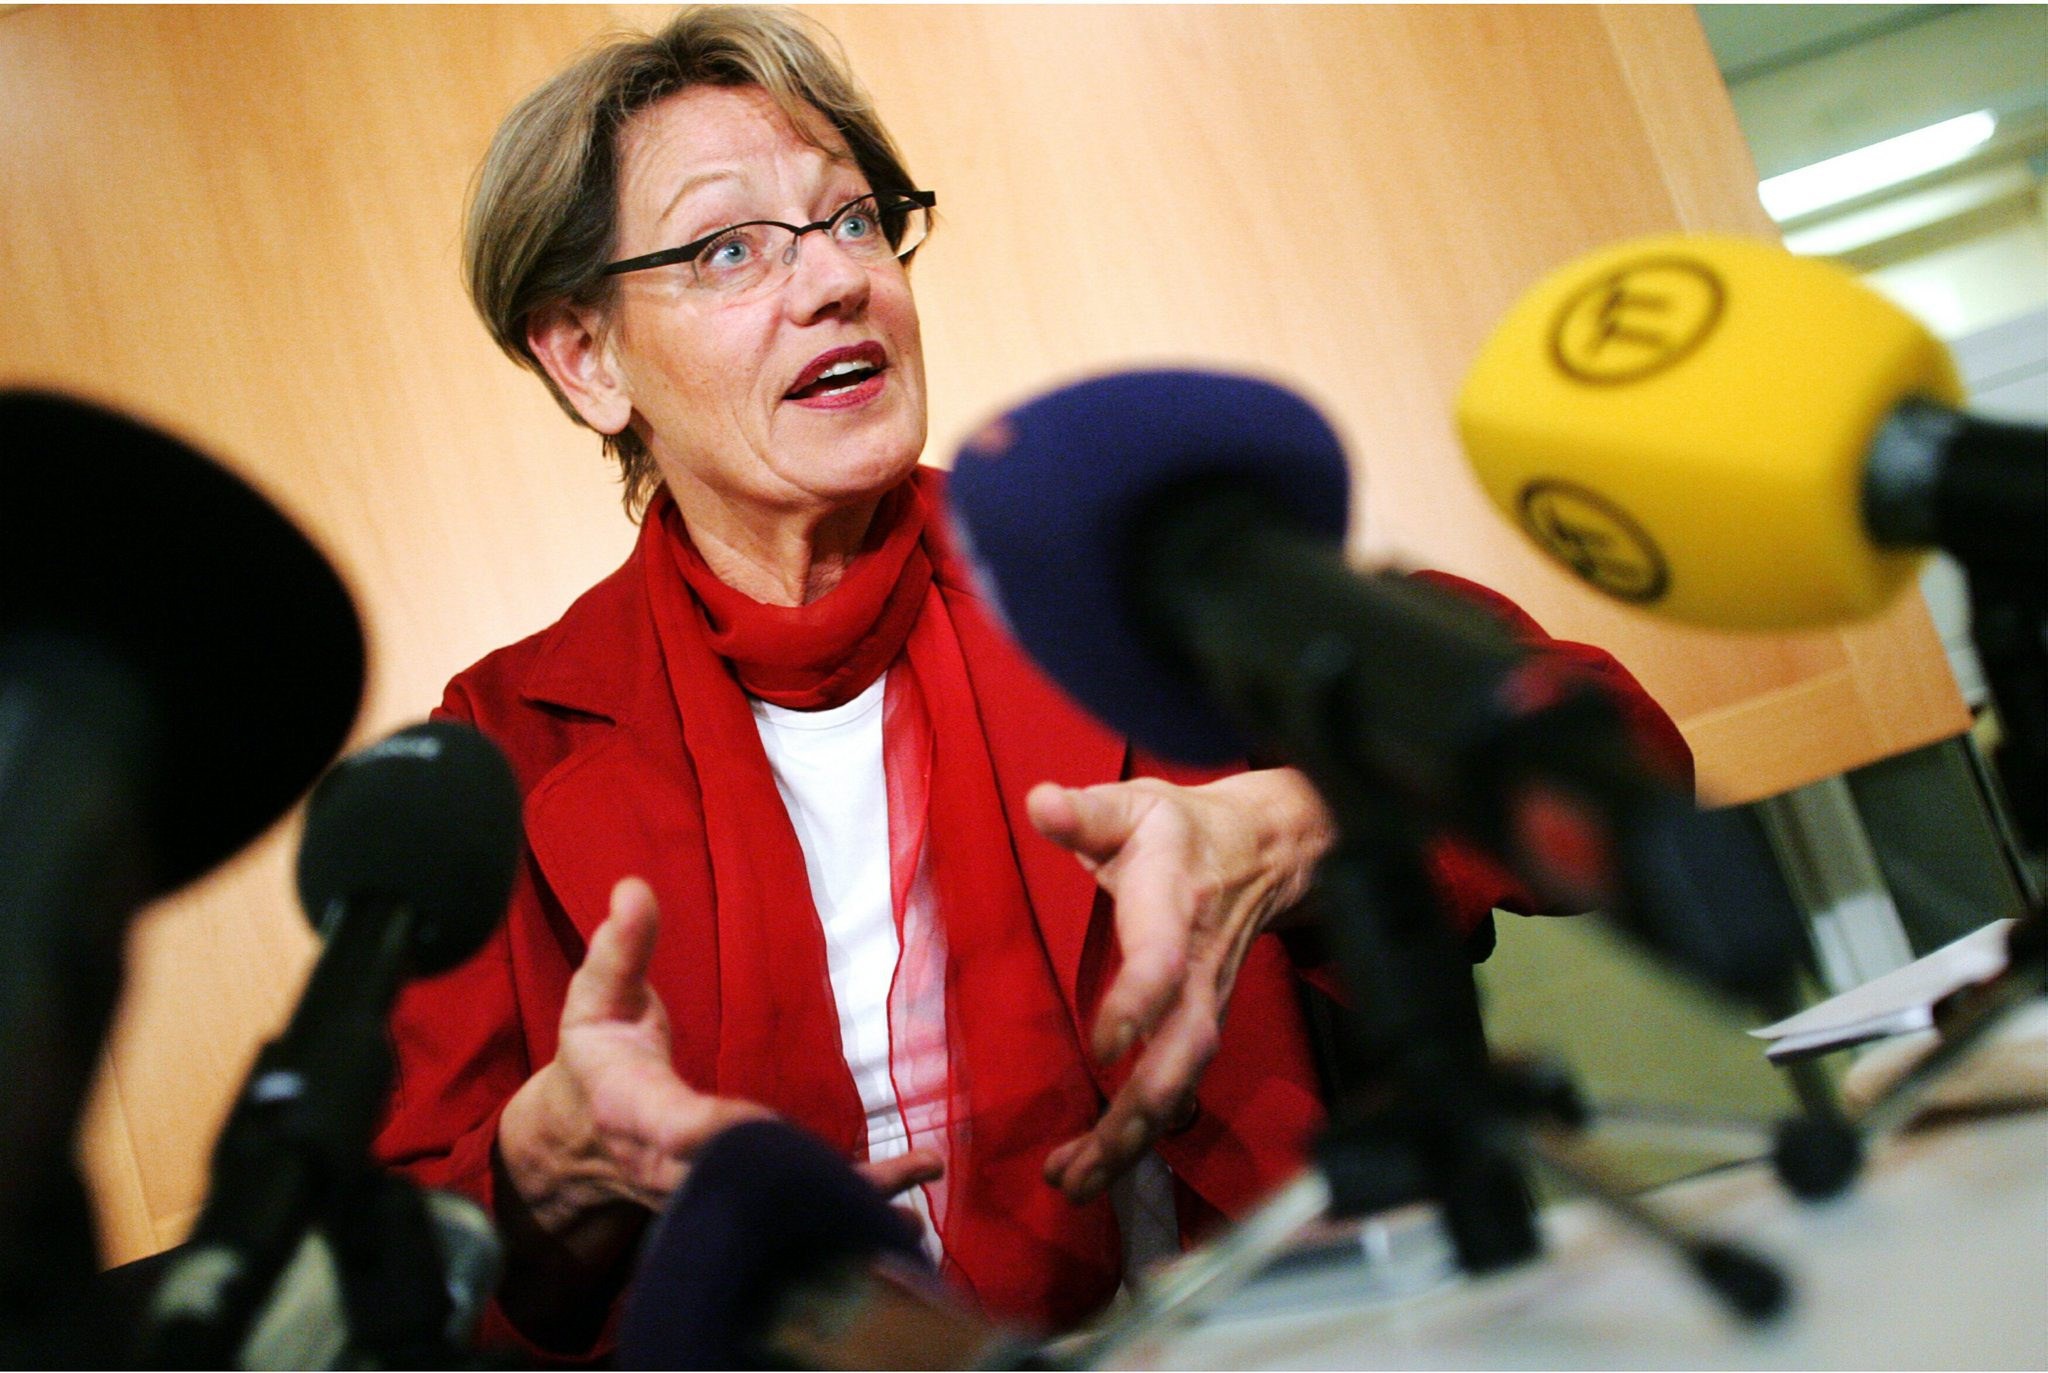 Gudrun Schyman, a Swedish politician and spokeswoman for the Feminist Initiative, pictured here on Dec. 7, 2004. (Soren Andersson—AFP/Getty Images)